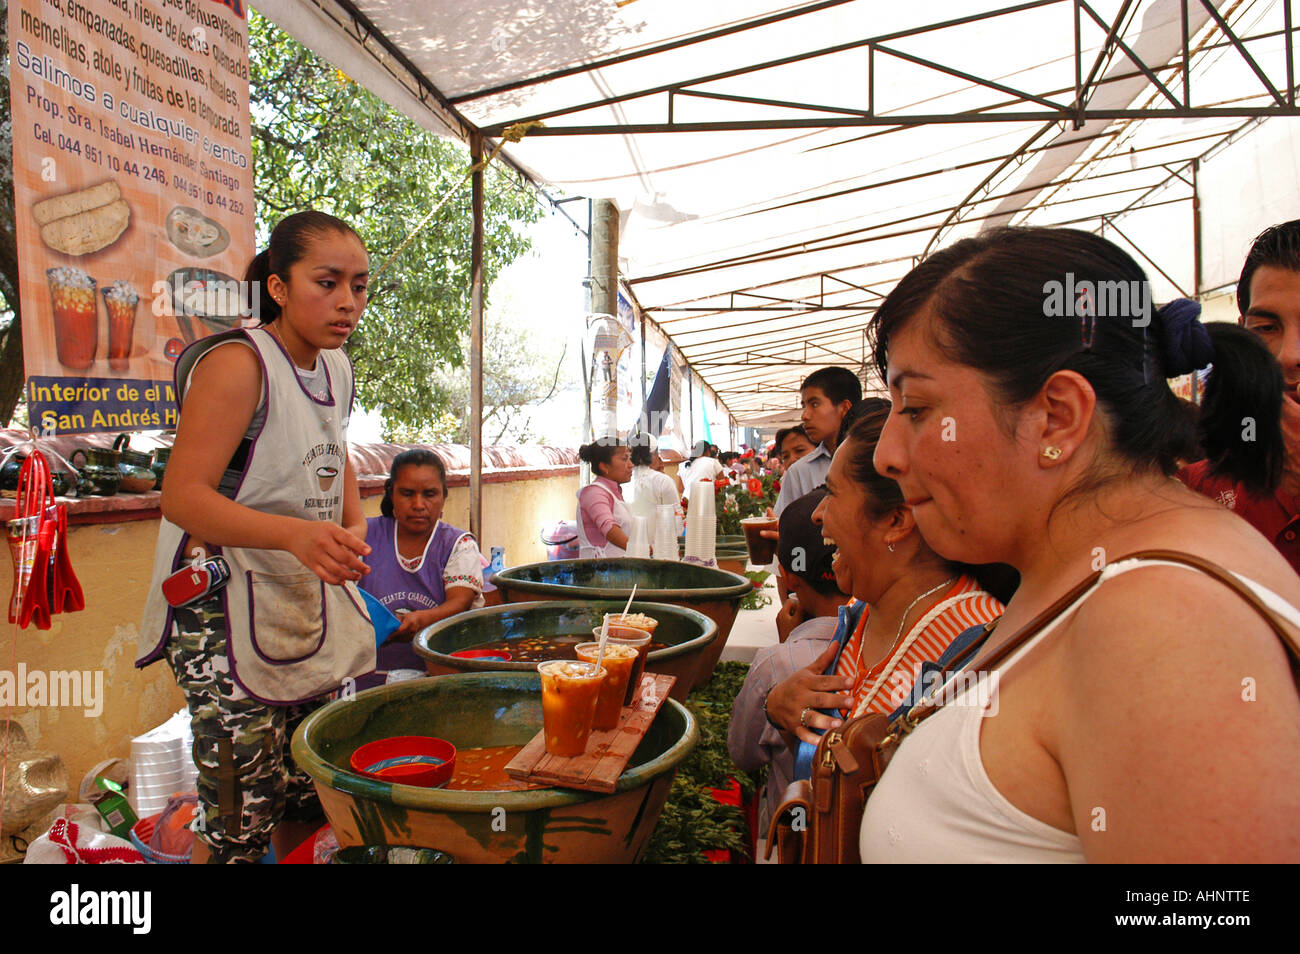 Festival of the traditional mexican drink Tejate in the village of St Andres Huayapam in The province of Oaxaca Mexico Stock Photo